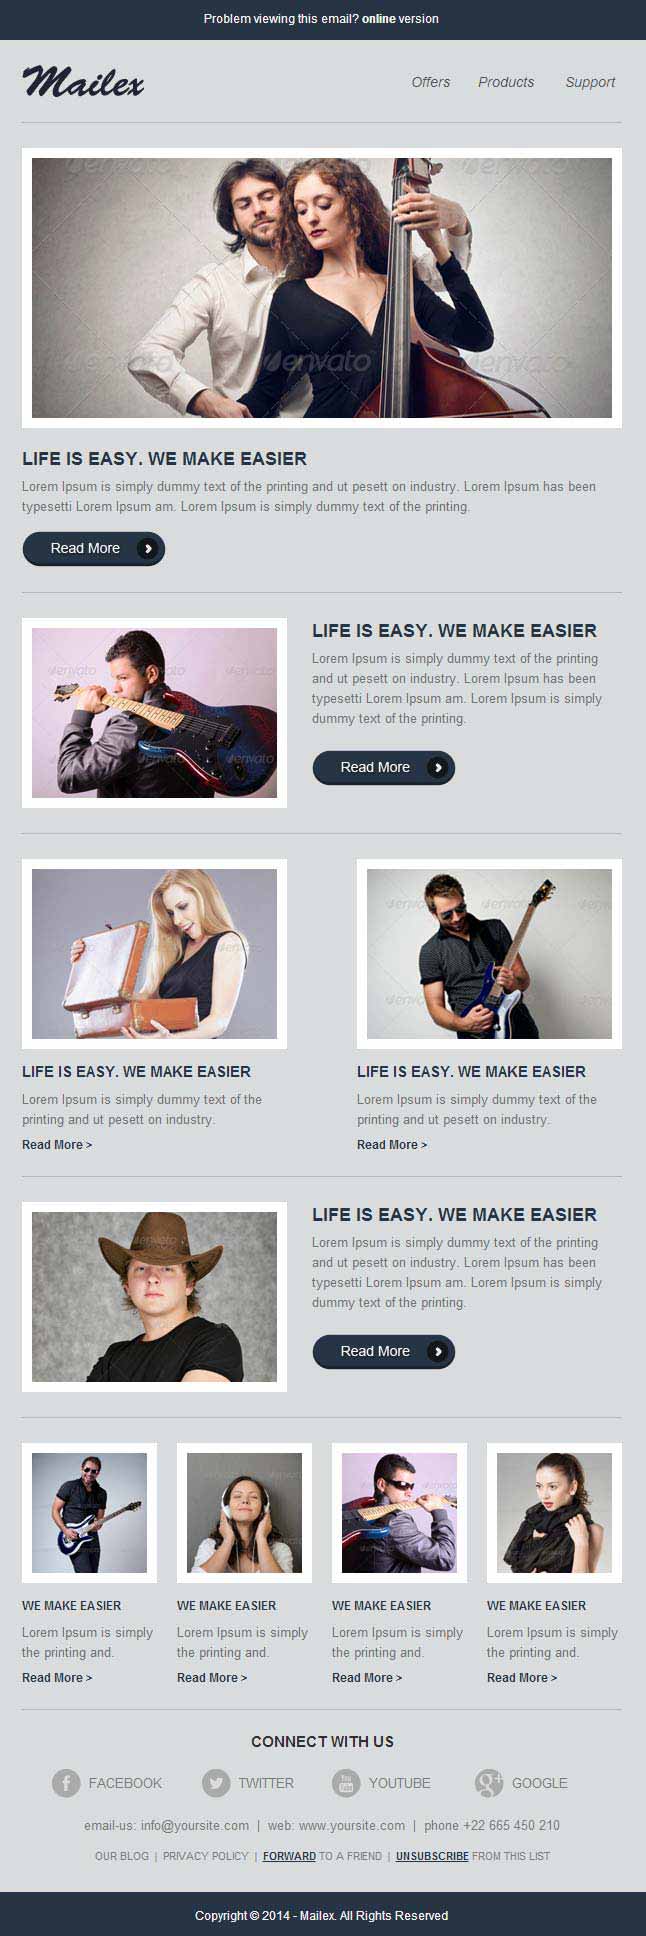 mailex professional responsive email template